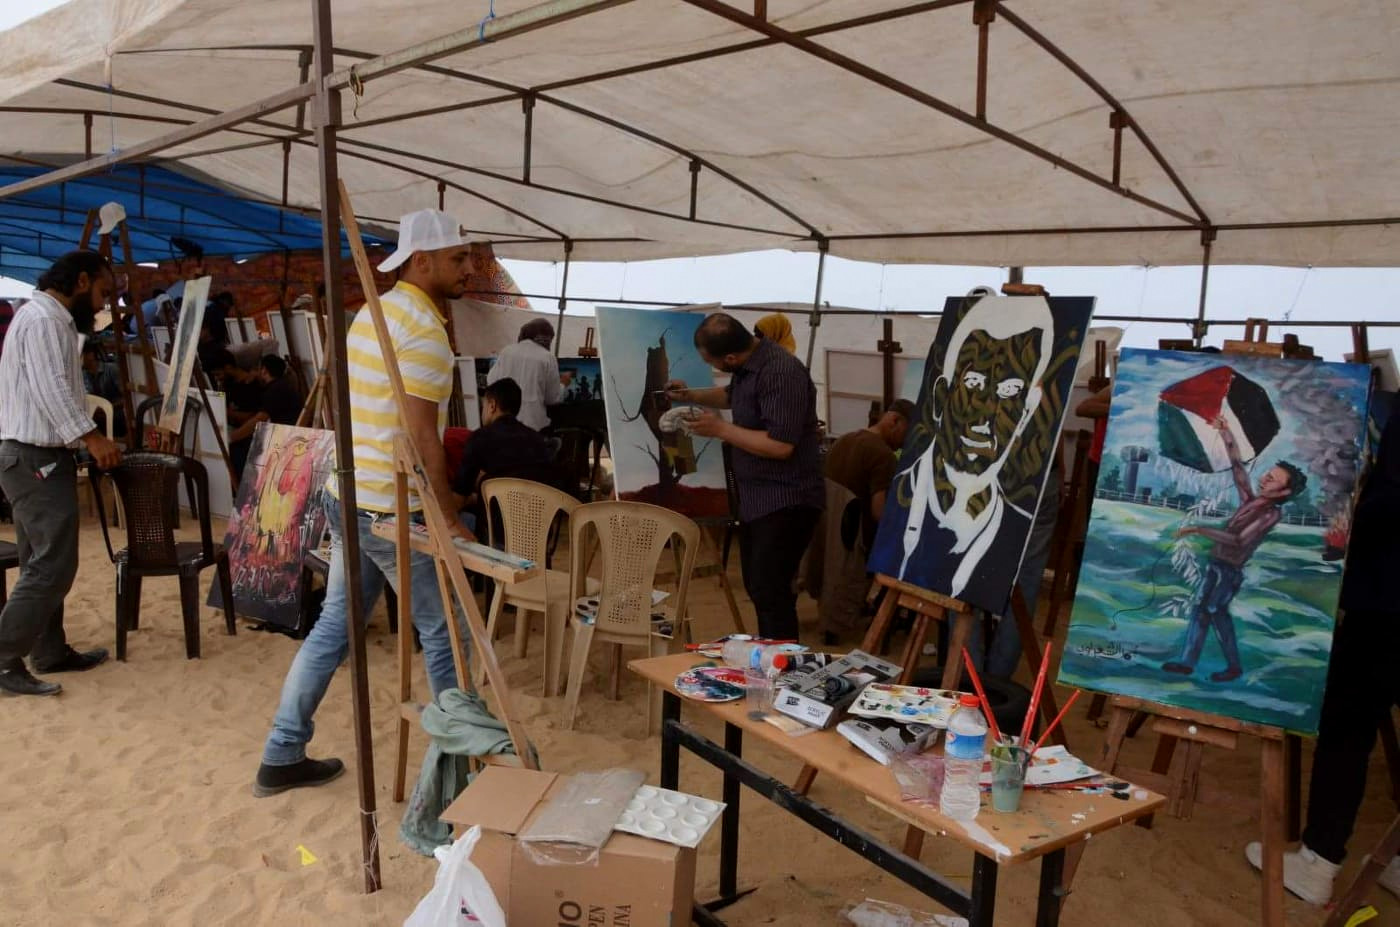 A view inside in the art protest tent near the Great Return March protests on the Gaza border. (Photo: Karim Naser)